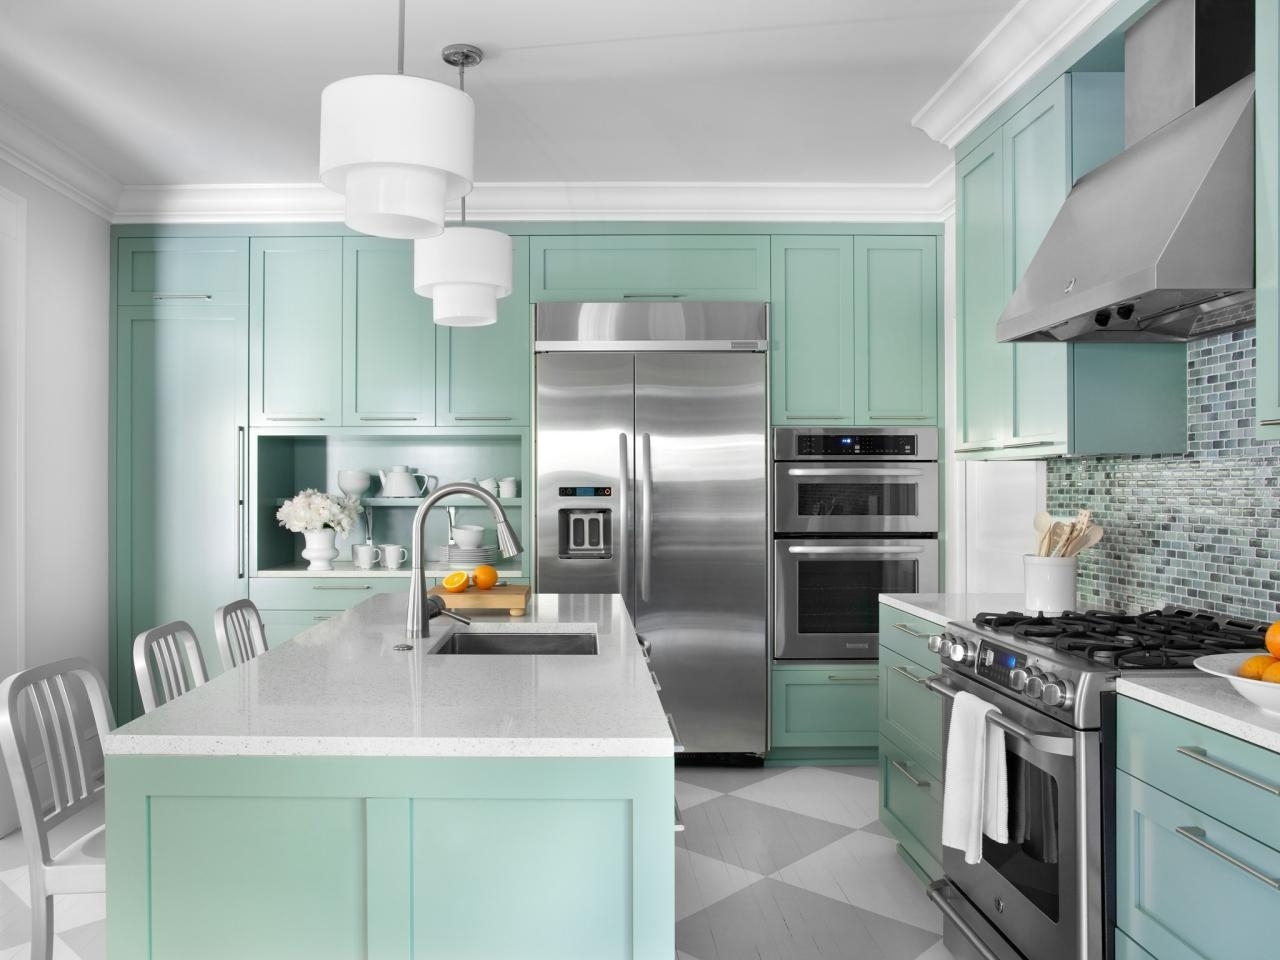 10 Lovely Kitchen Cabinet Paint Color Ideas %name 2022